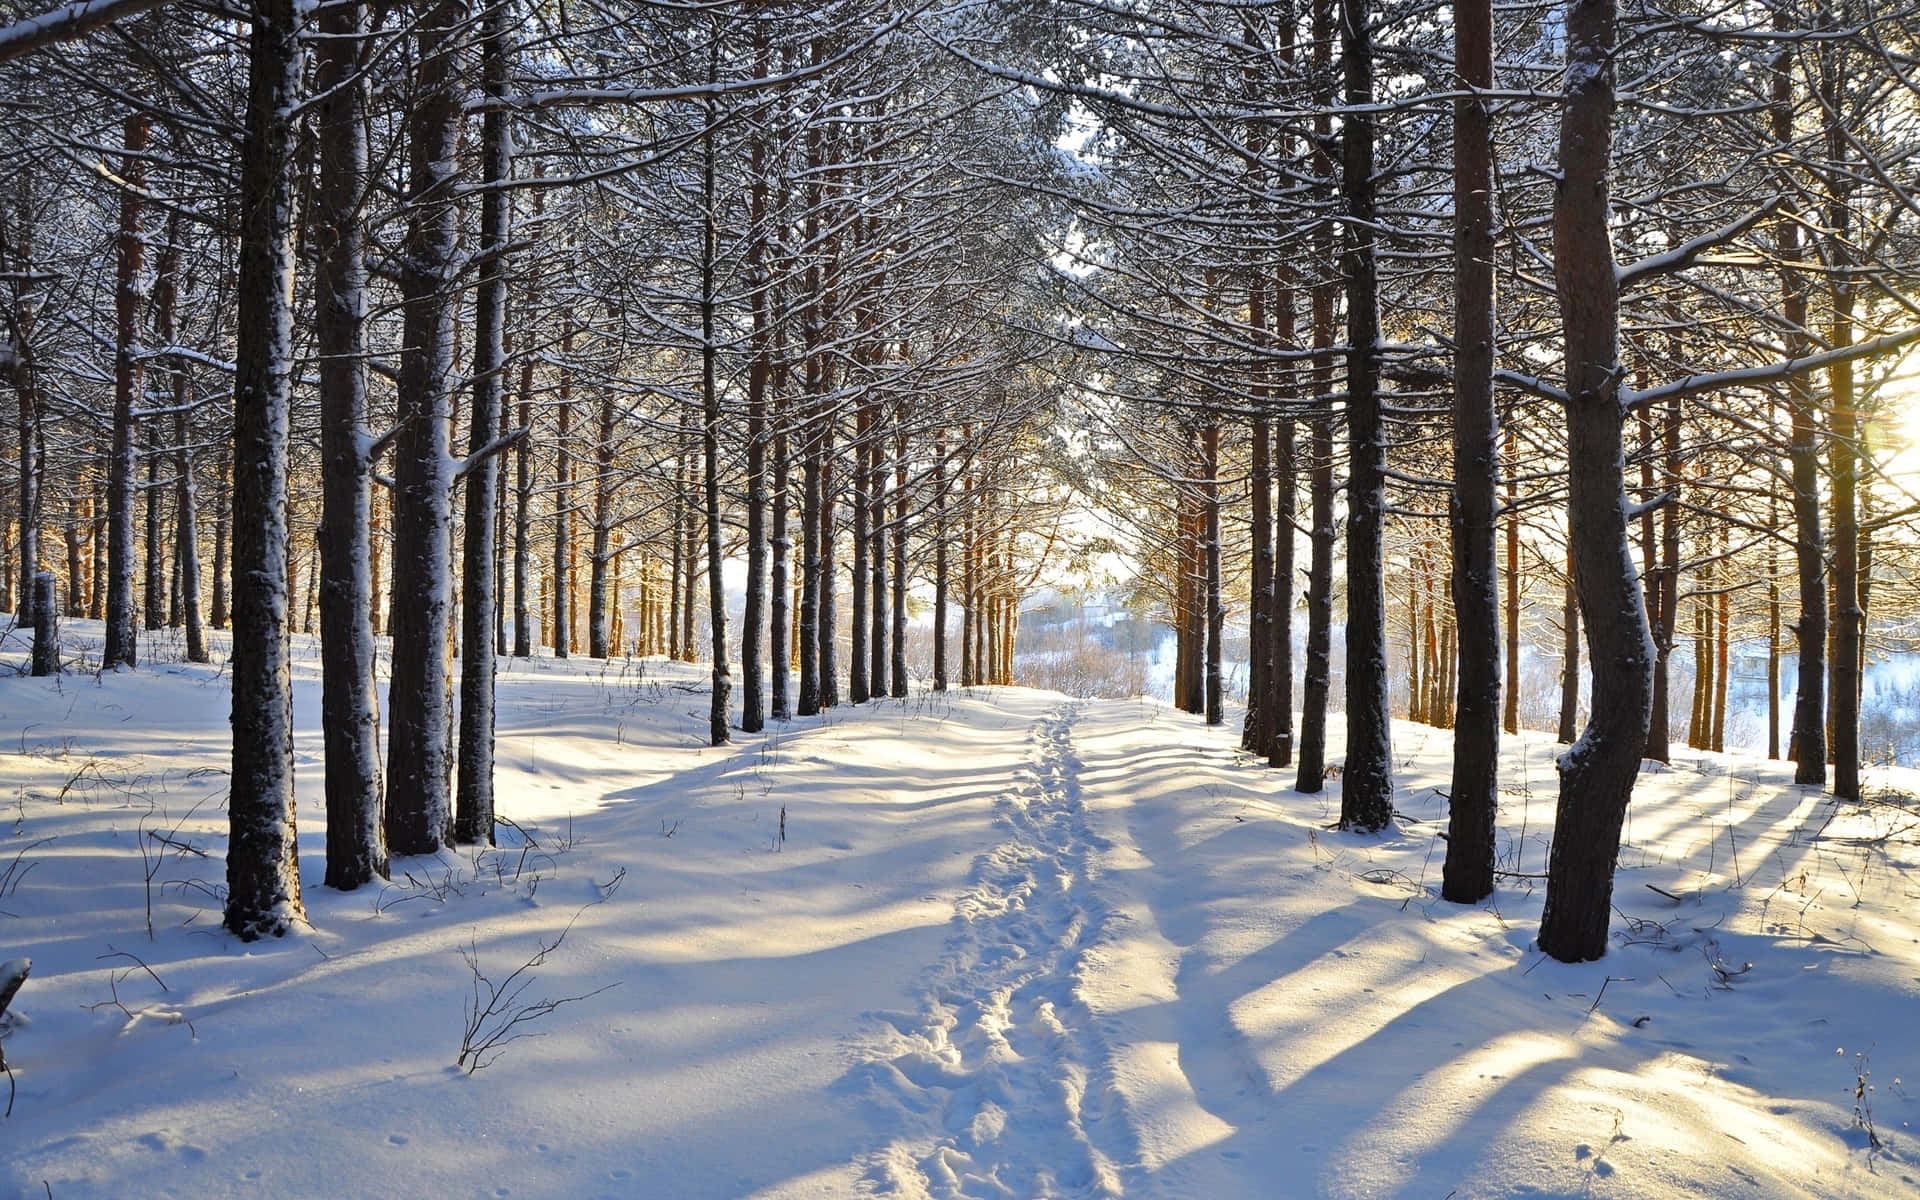 A Magnificent View of an Idyllic Snowy Forest